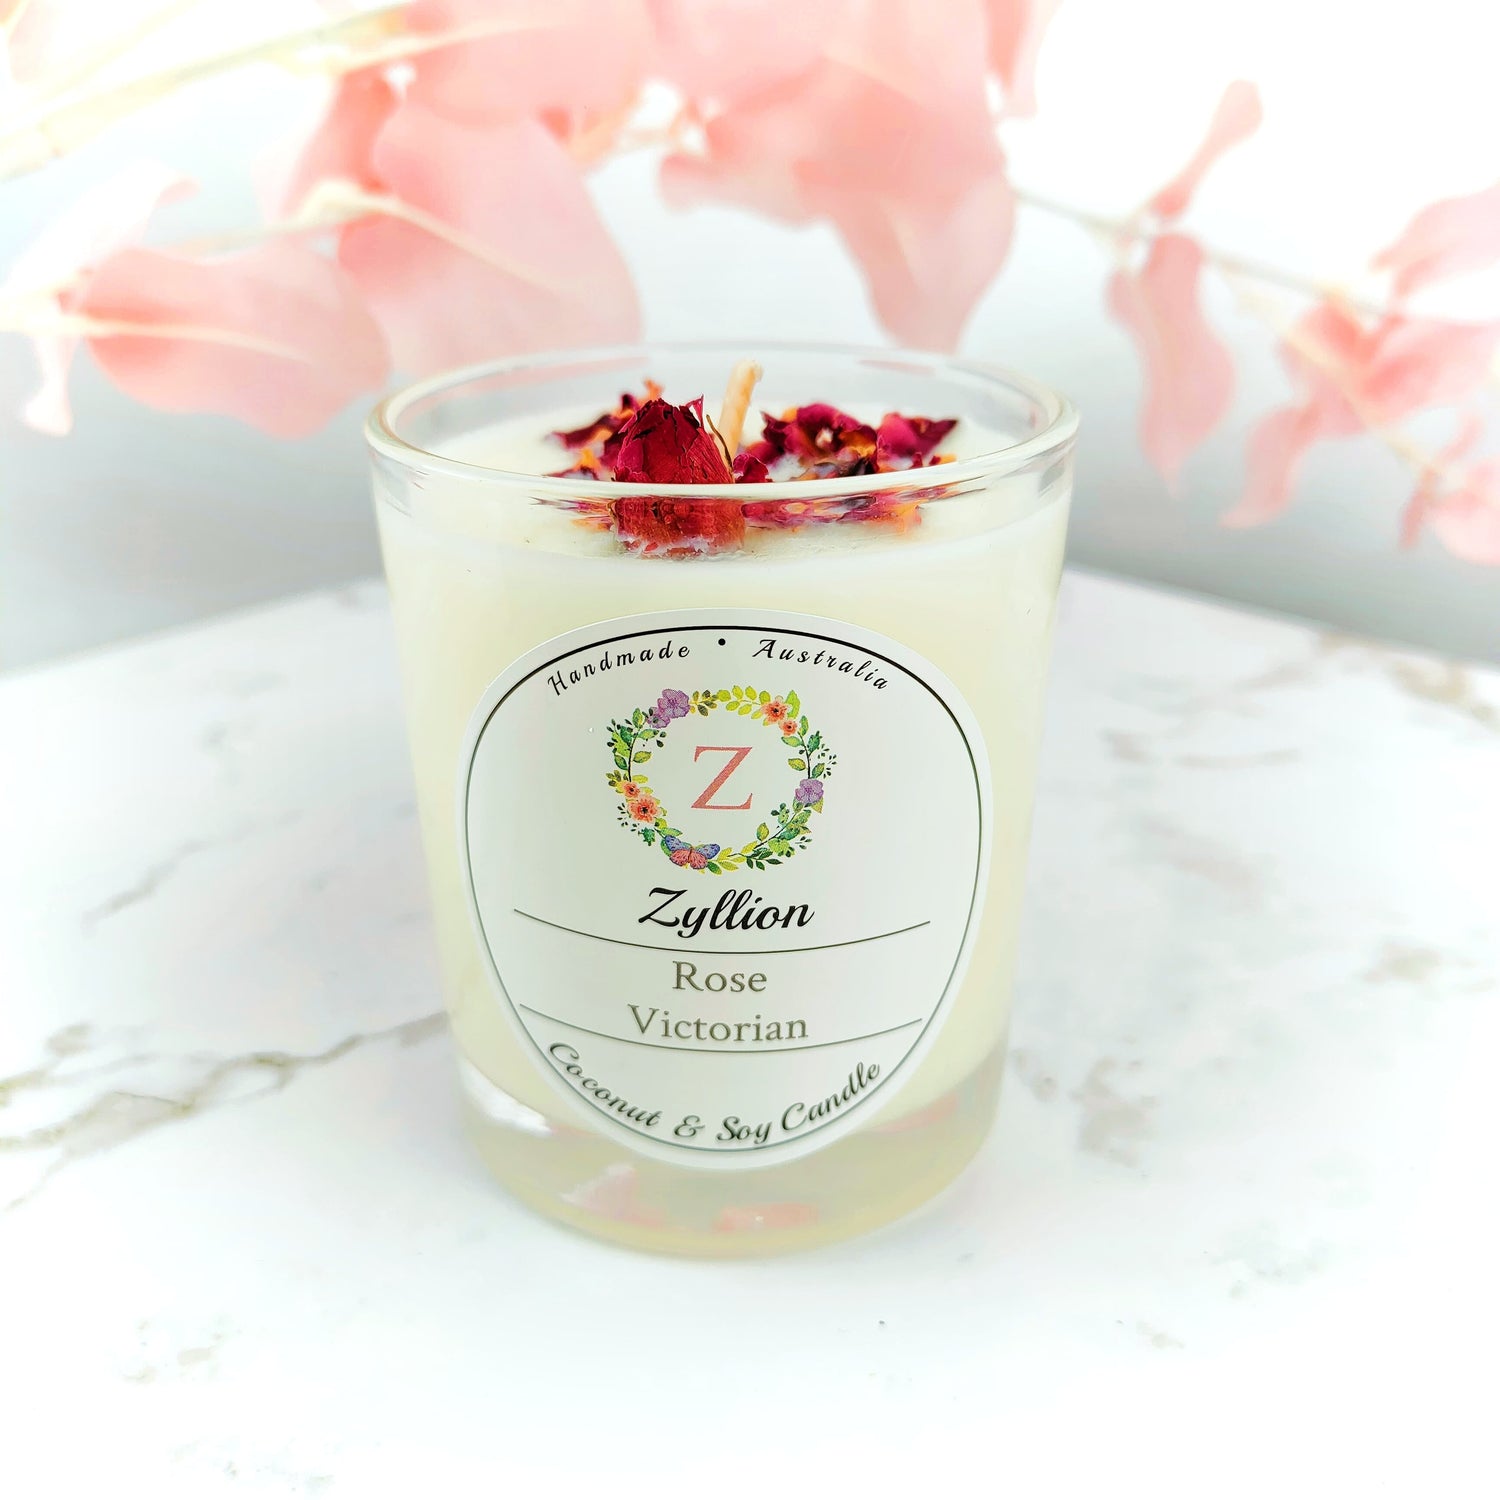 Coconut & Soy Candle